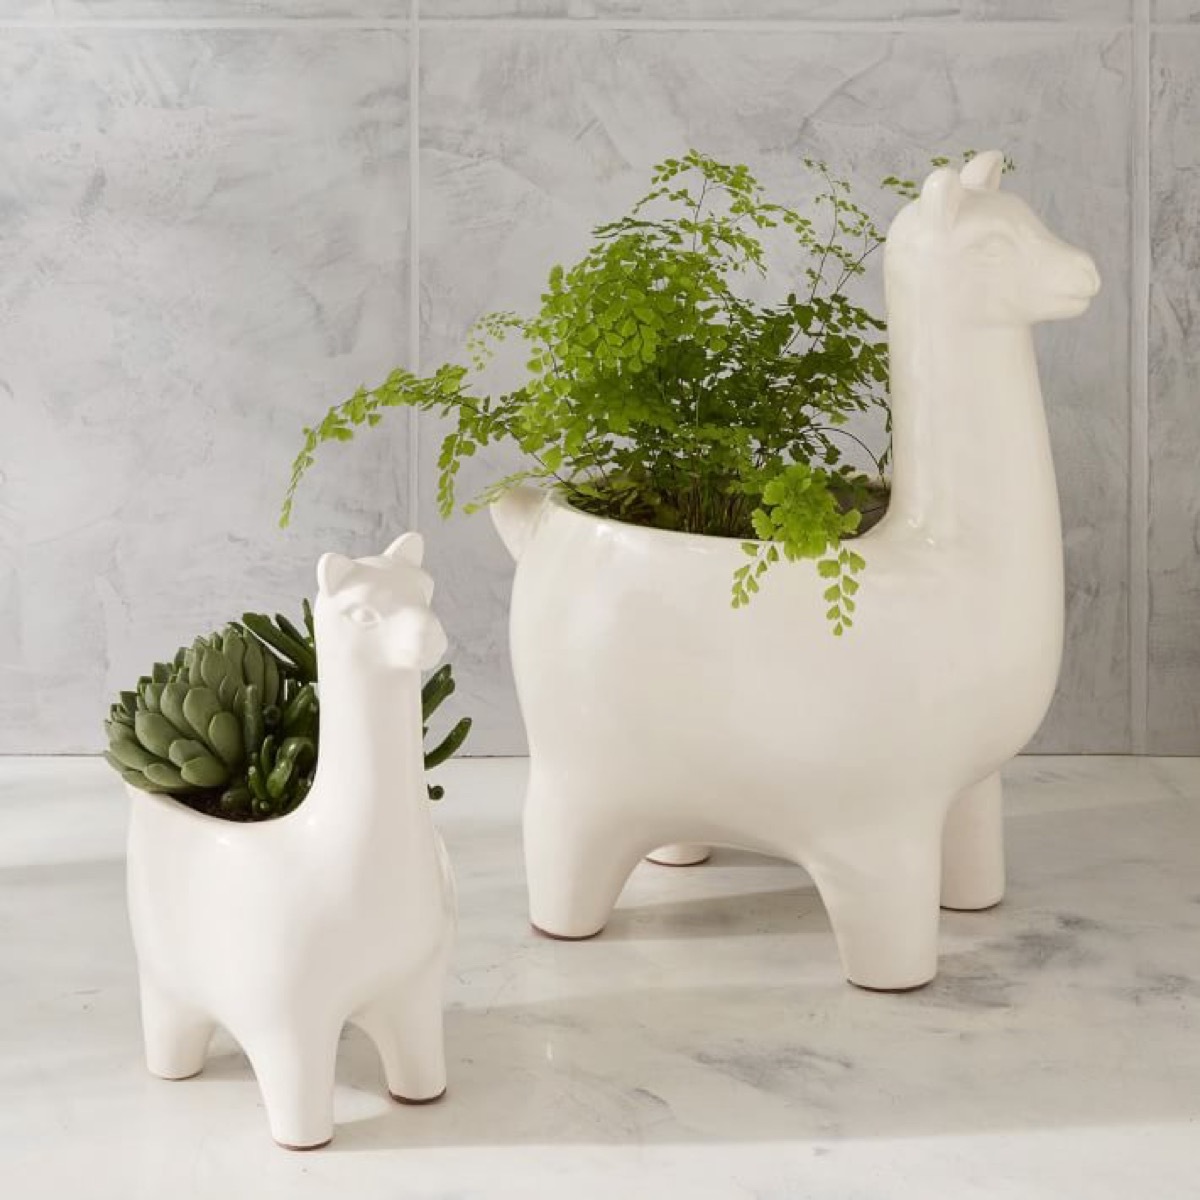 Two sizes of llama planters with plants